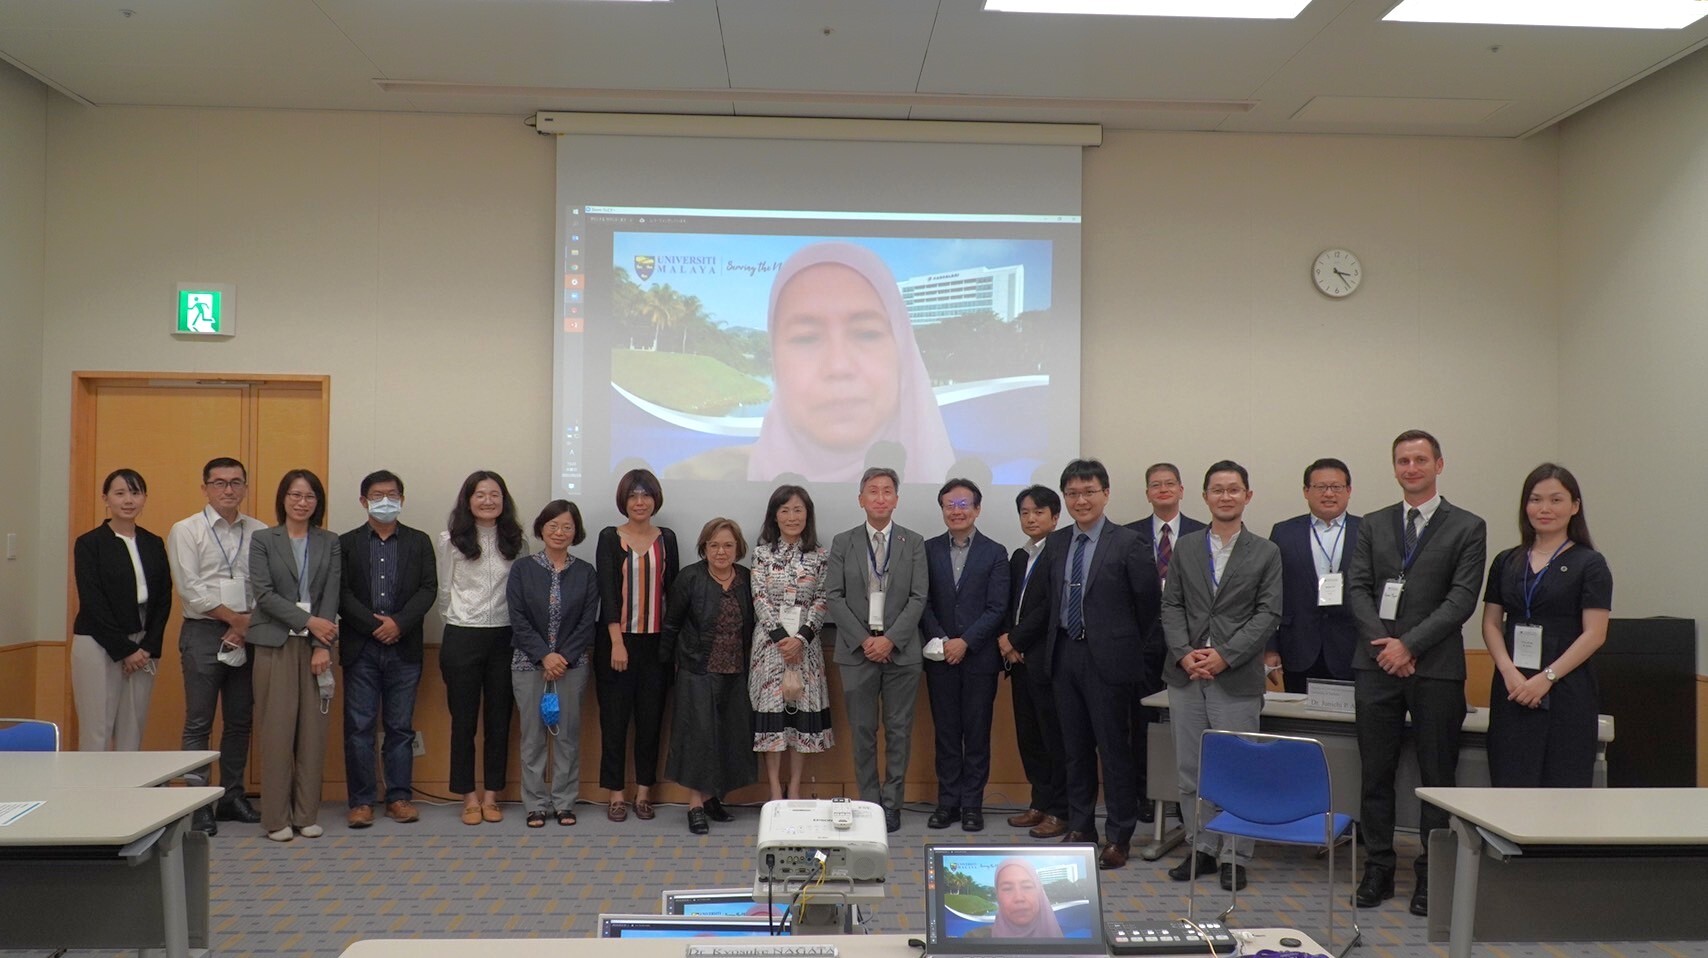 President Su of NCKU (9th from left) was invited to the University of Tsukuba, Japan, to participate in the annual "Tsukuba Global Science Week" on 29 Sept.